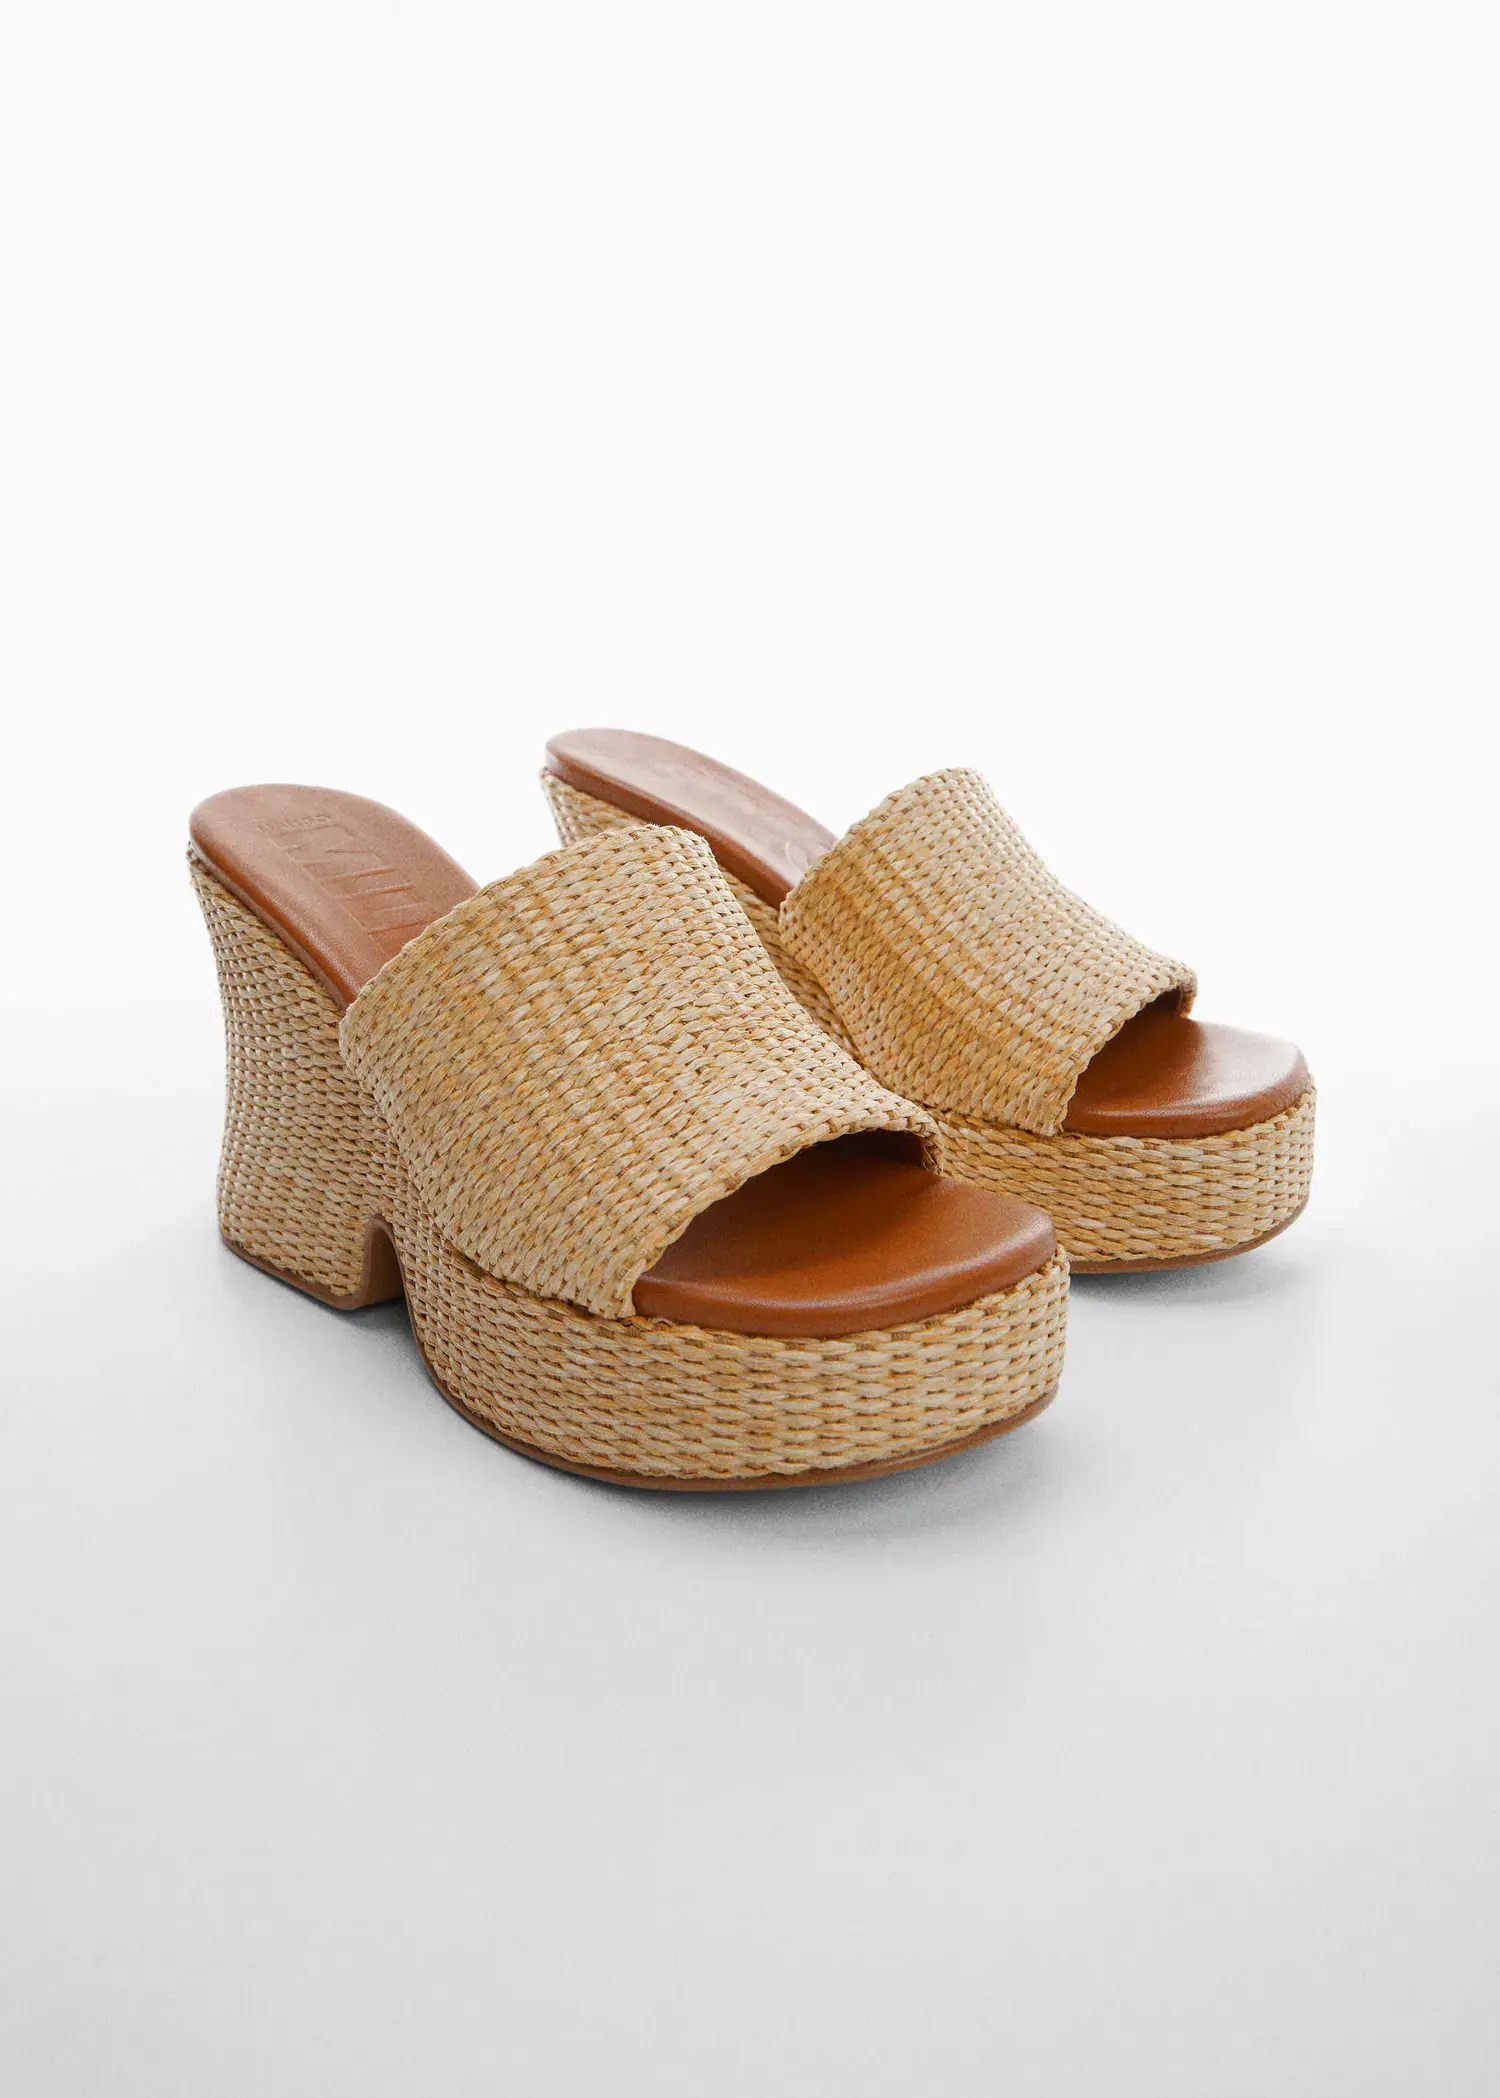 Mango Natural fiber wedge sandals. a close up of a pair of shoes on a white surface 